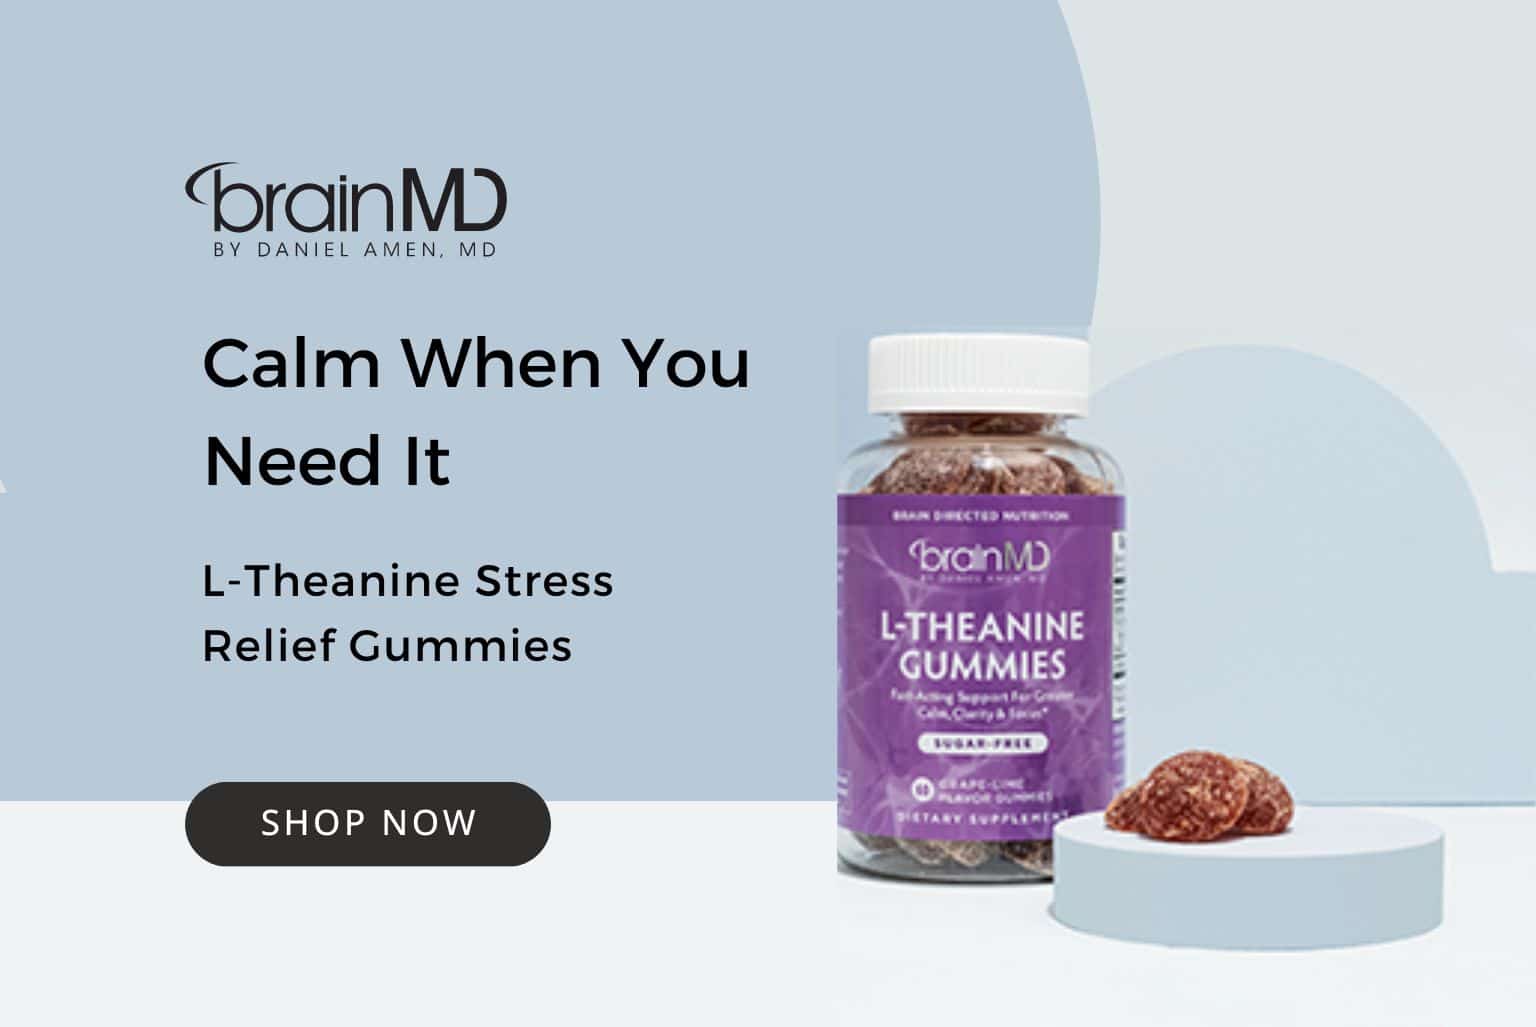 Click here to get vegan L-Theanine Gummies from Dr. Daniel Amen at BrainMD